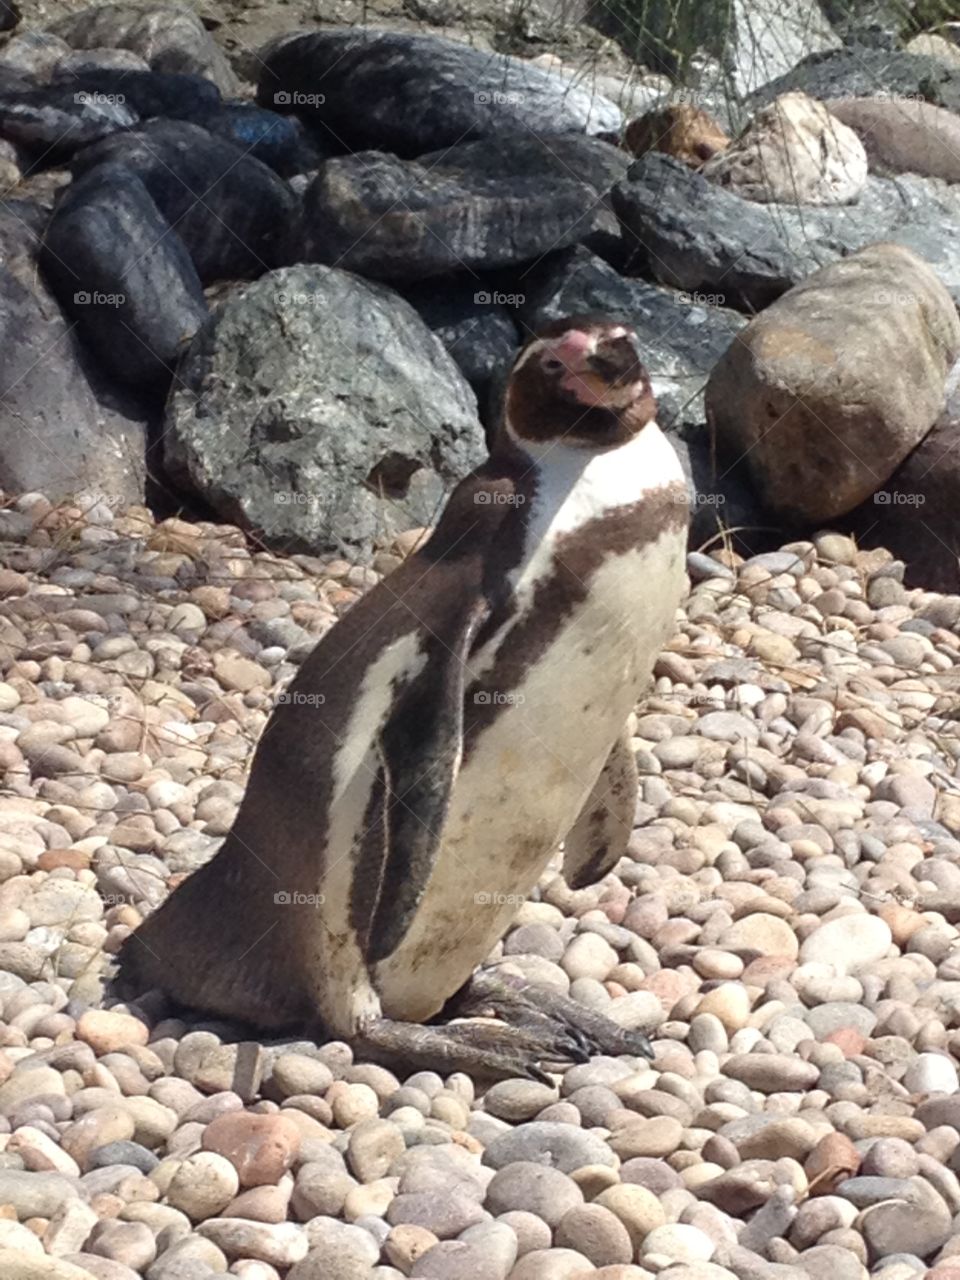 Another penguin at the zoo